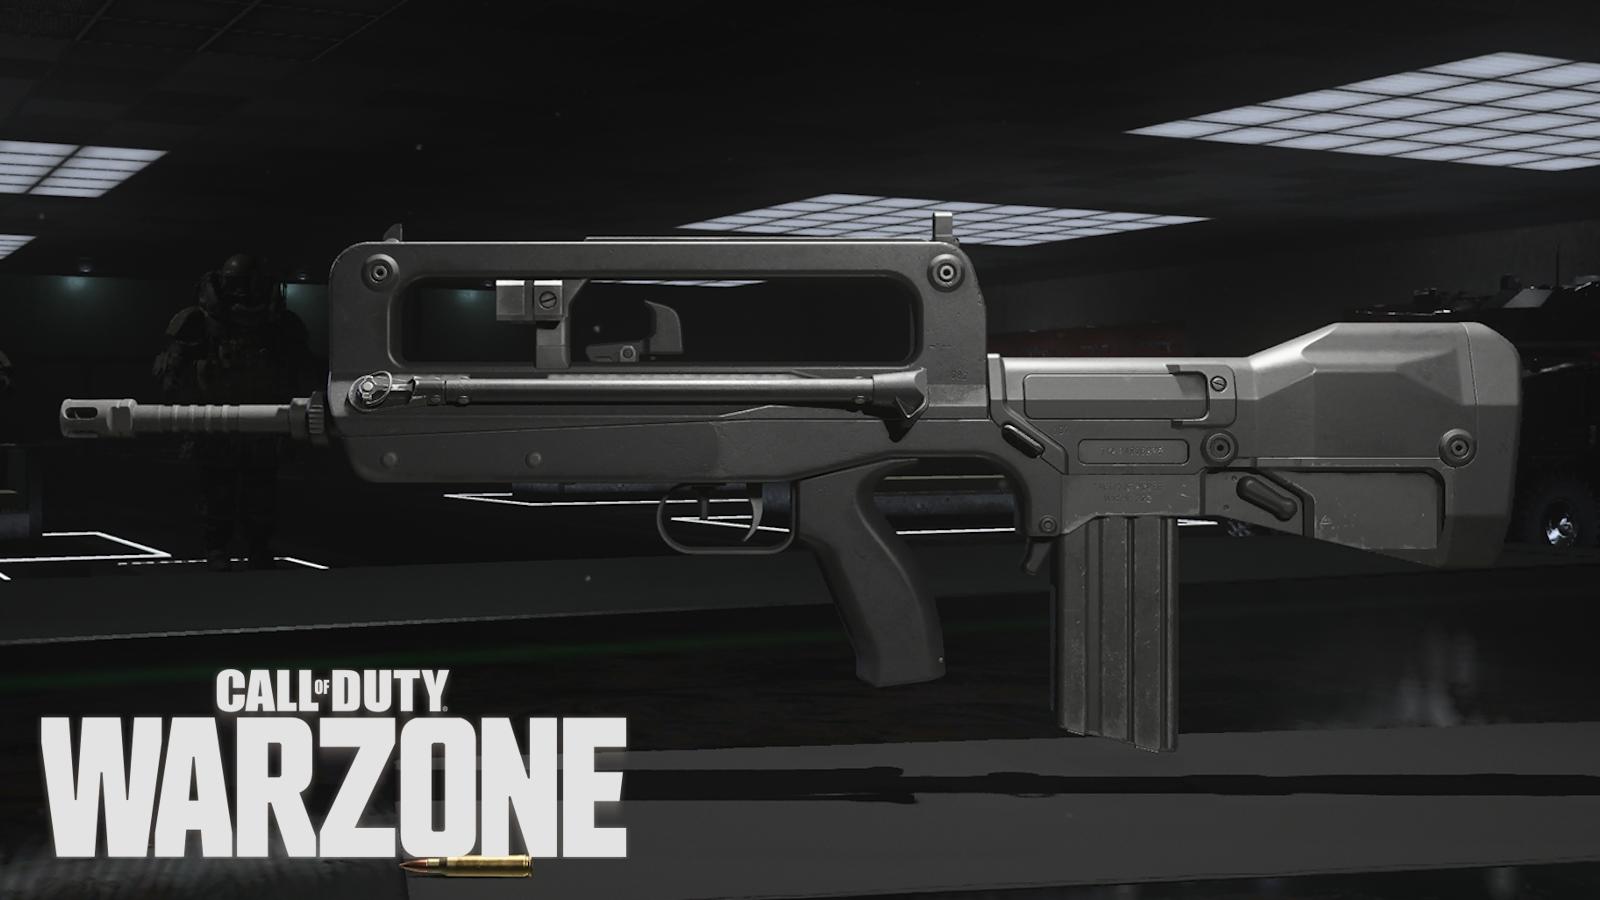 FR 5.56 assault rifle with Warzone logo.